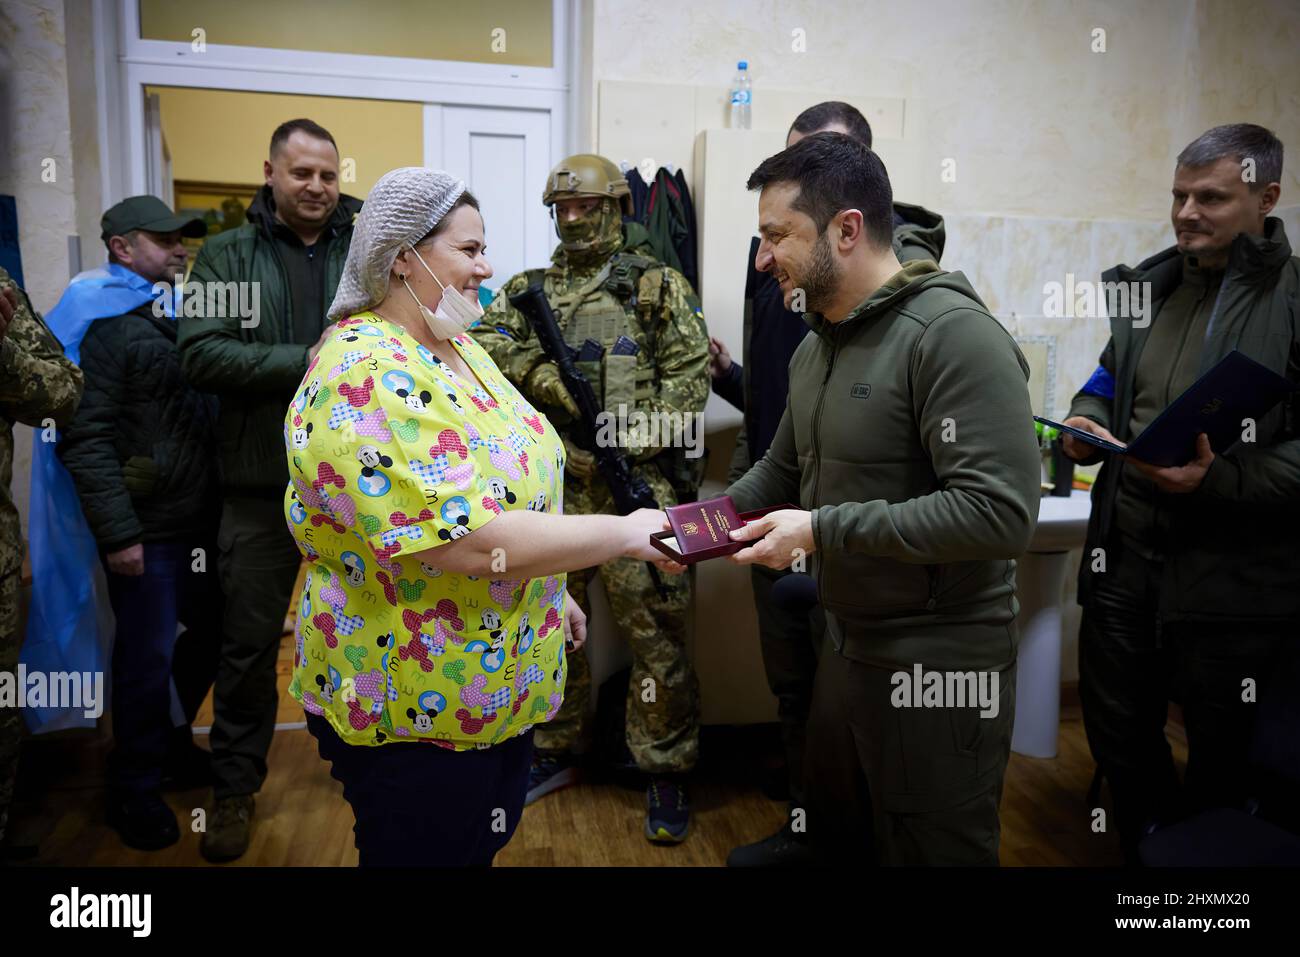 (Kyiv, Ukraine - 13.3.22) President Volodymyr Zelensky of Ukraine walks to a military hospital in Kyiv, Ukraine to visit with soldiers wounded during the Russian invasion, also awarding medals to the combatants and medical personnel for their service to their country. (Photo: Ukraine Presidential Press Office) Stock Photo